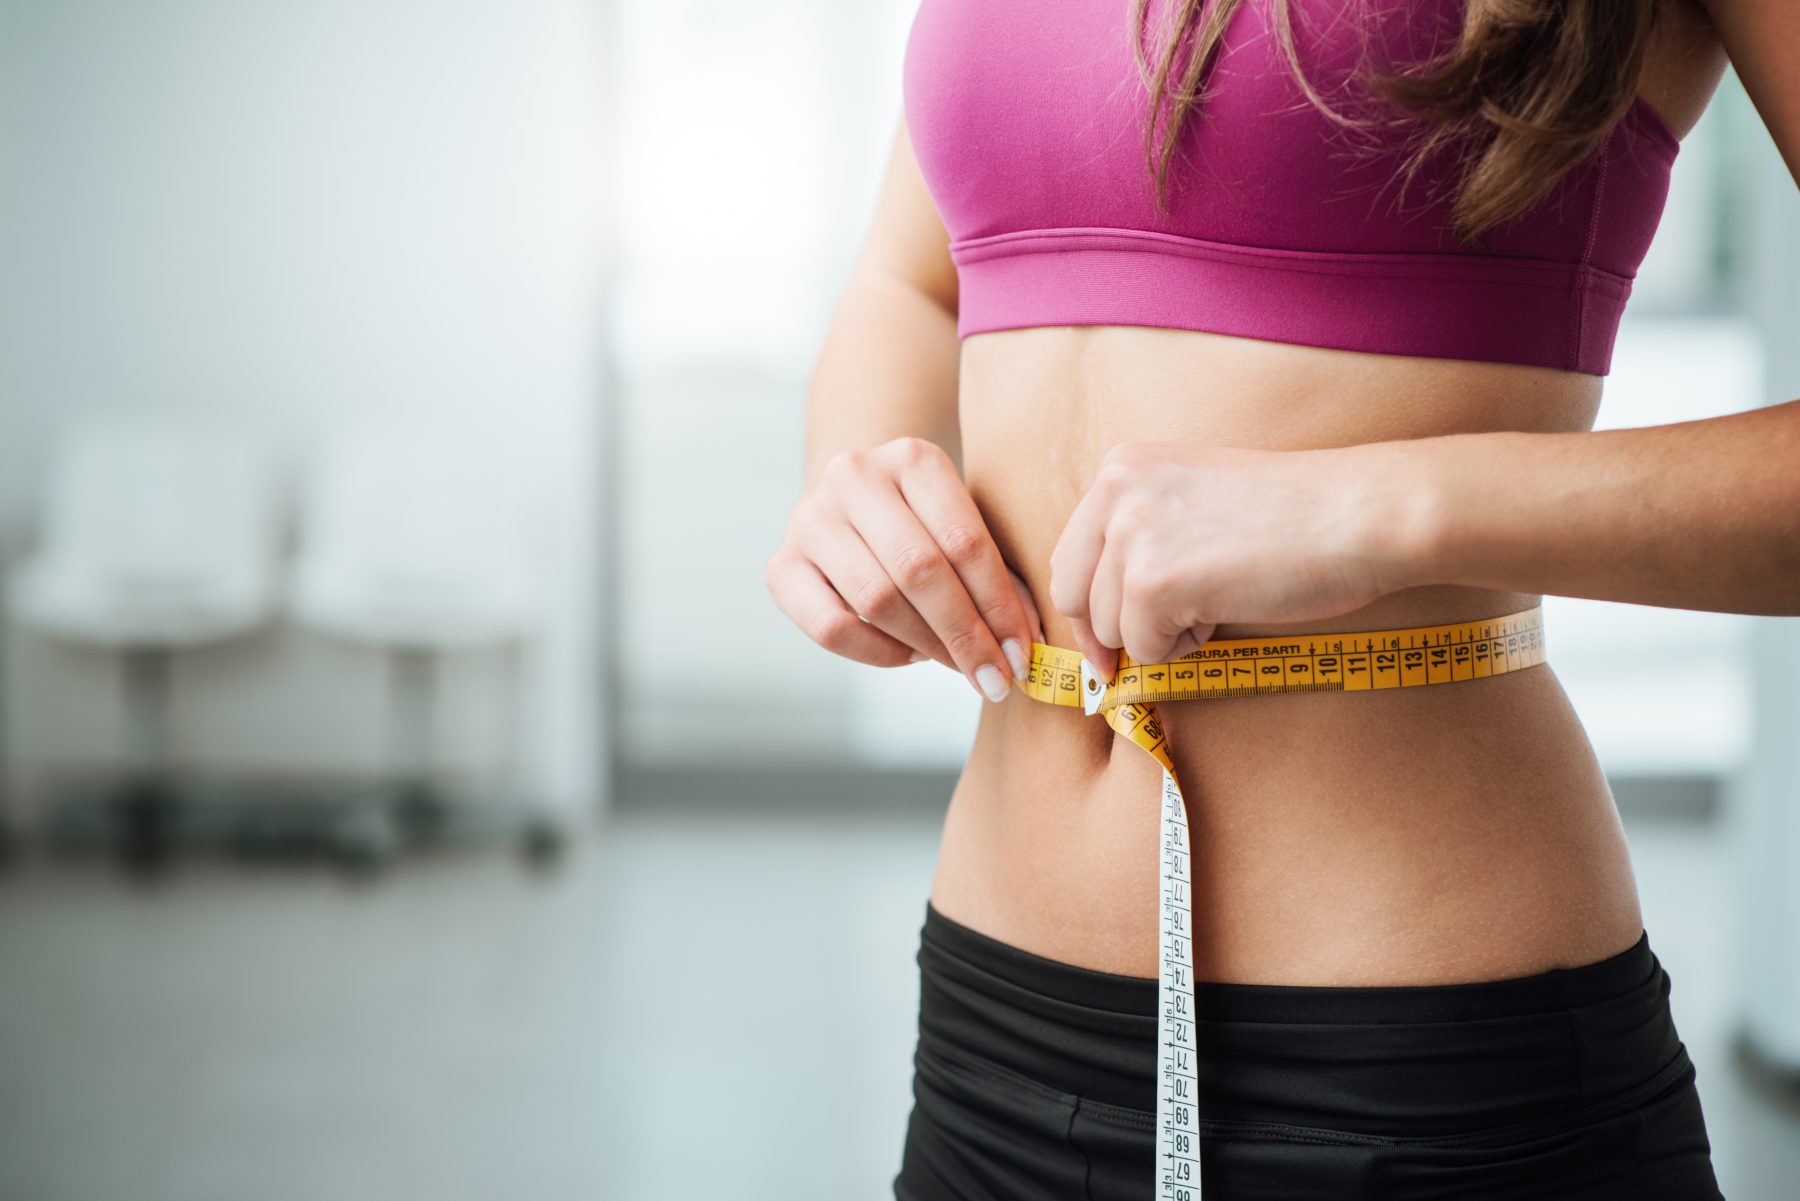 Woman with flat abs measuring her stomach with measuring tape